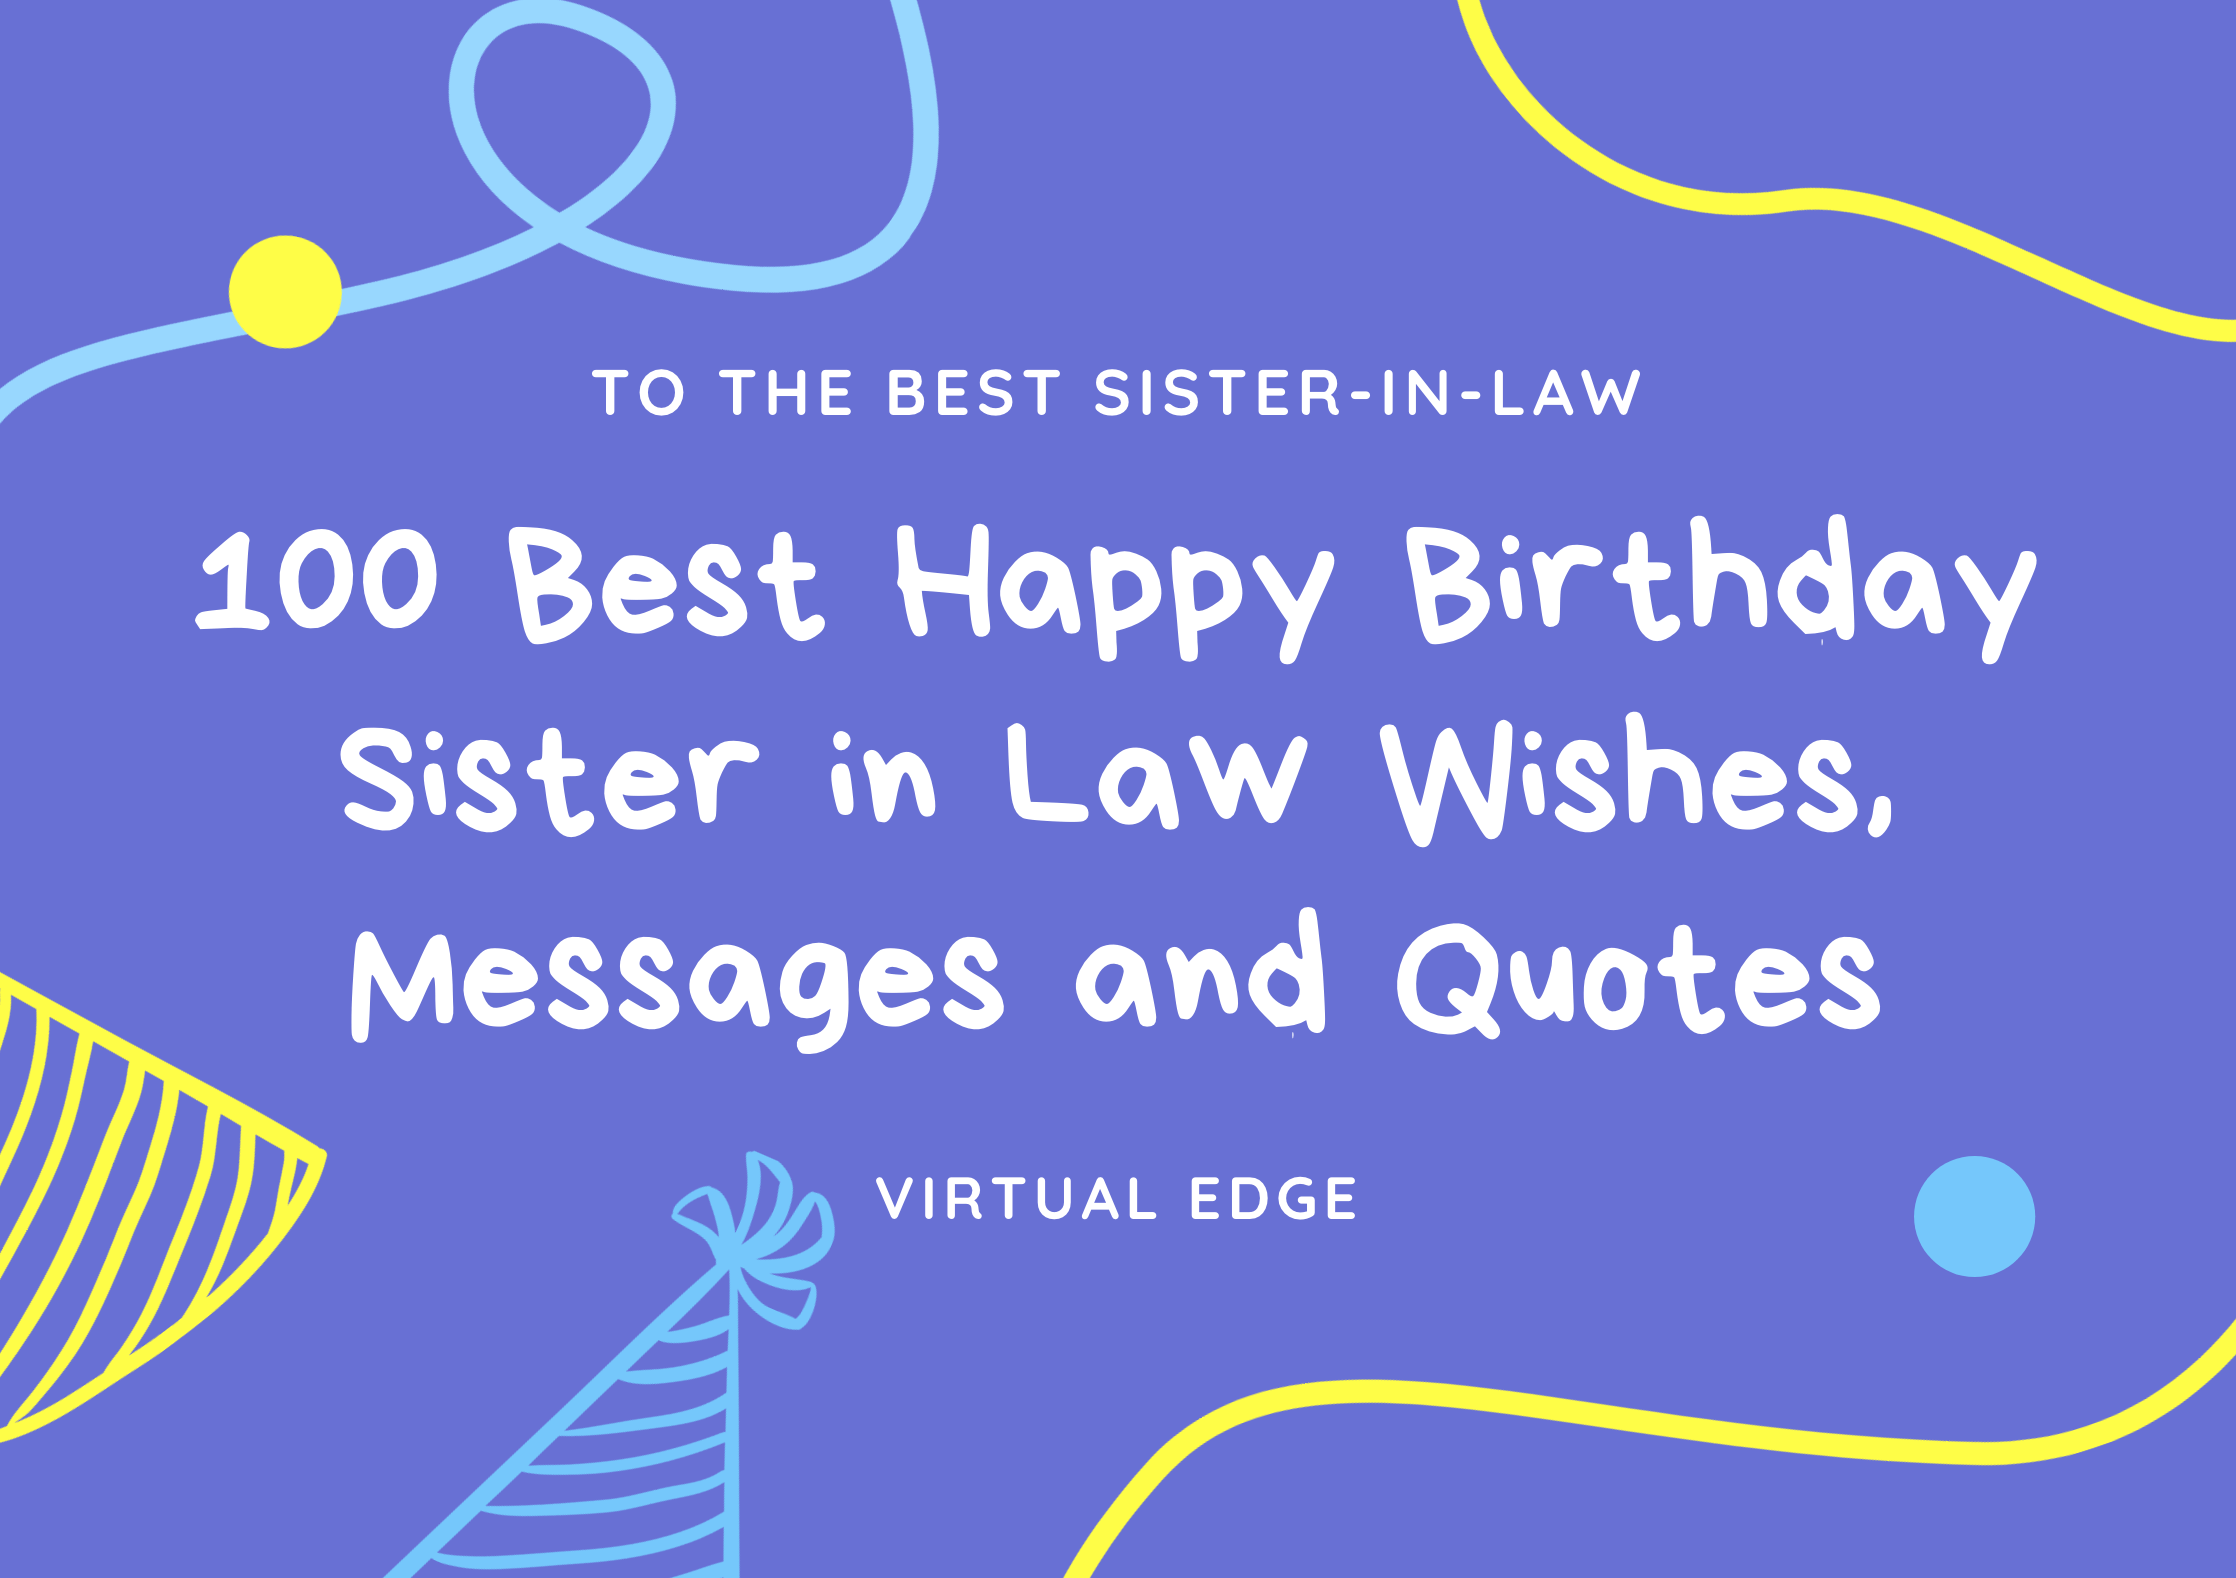 100-best-happy-birthday-sister-in-law-wishes-messages-and-quotes